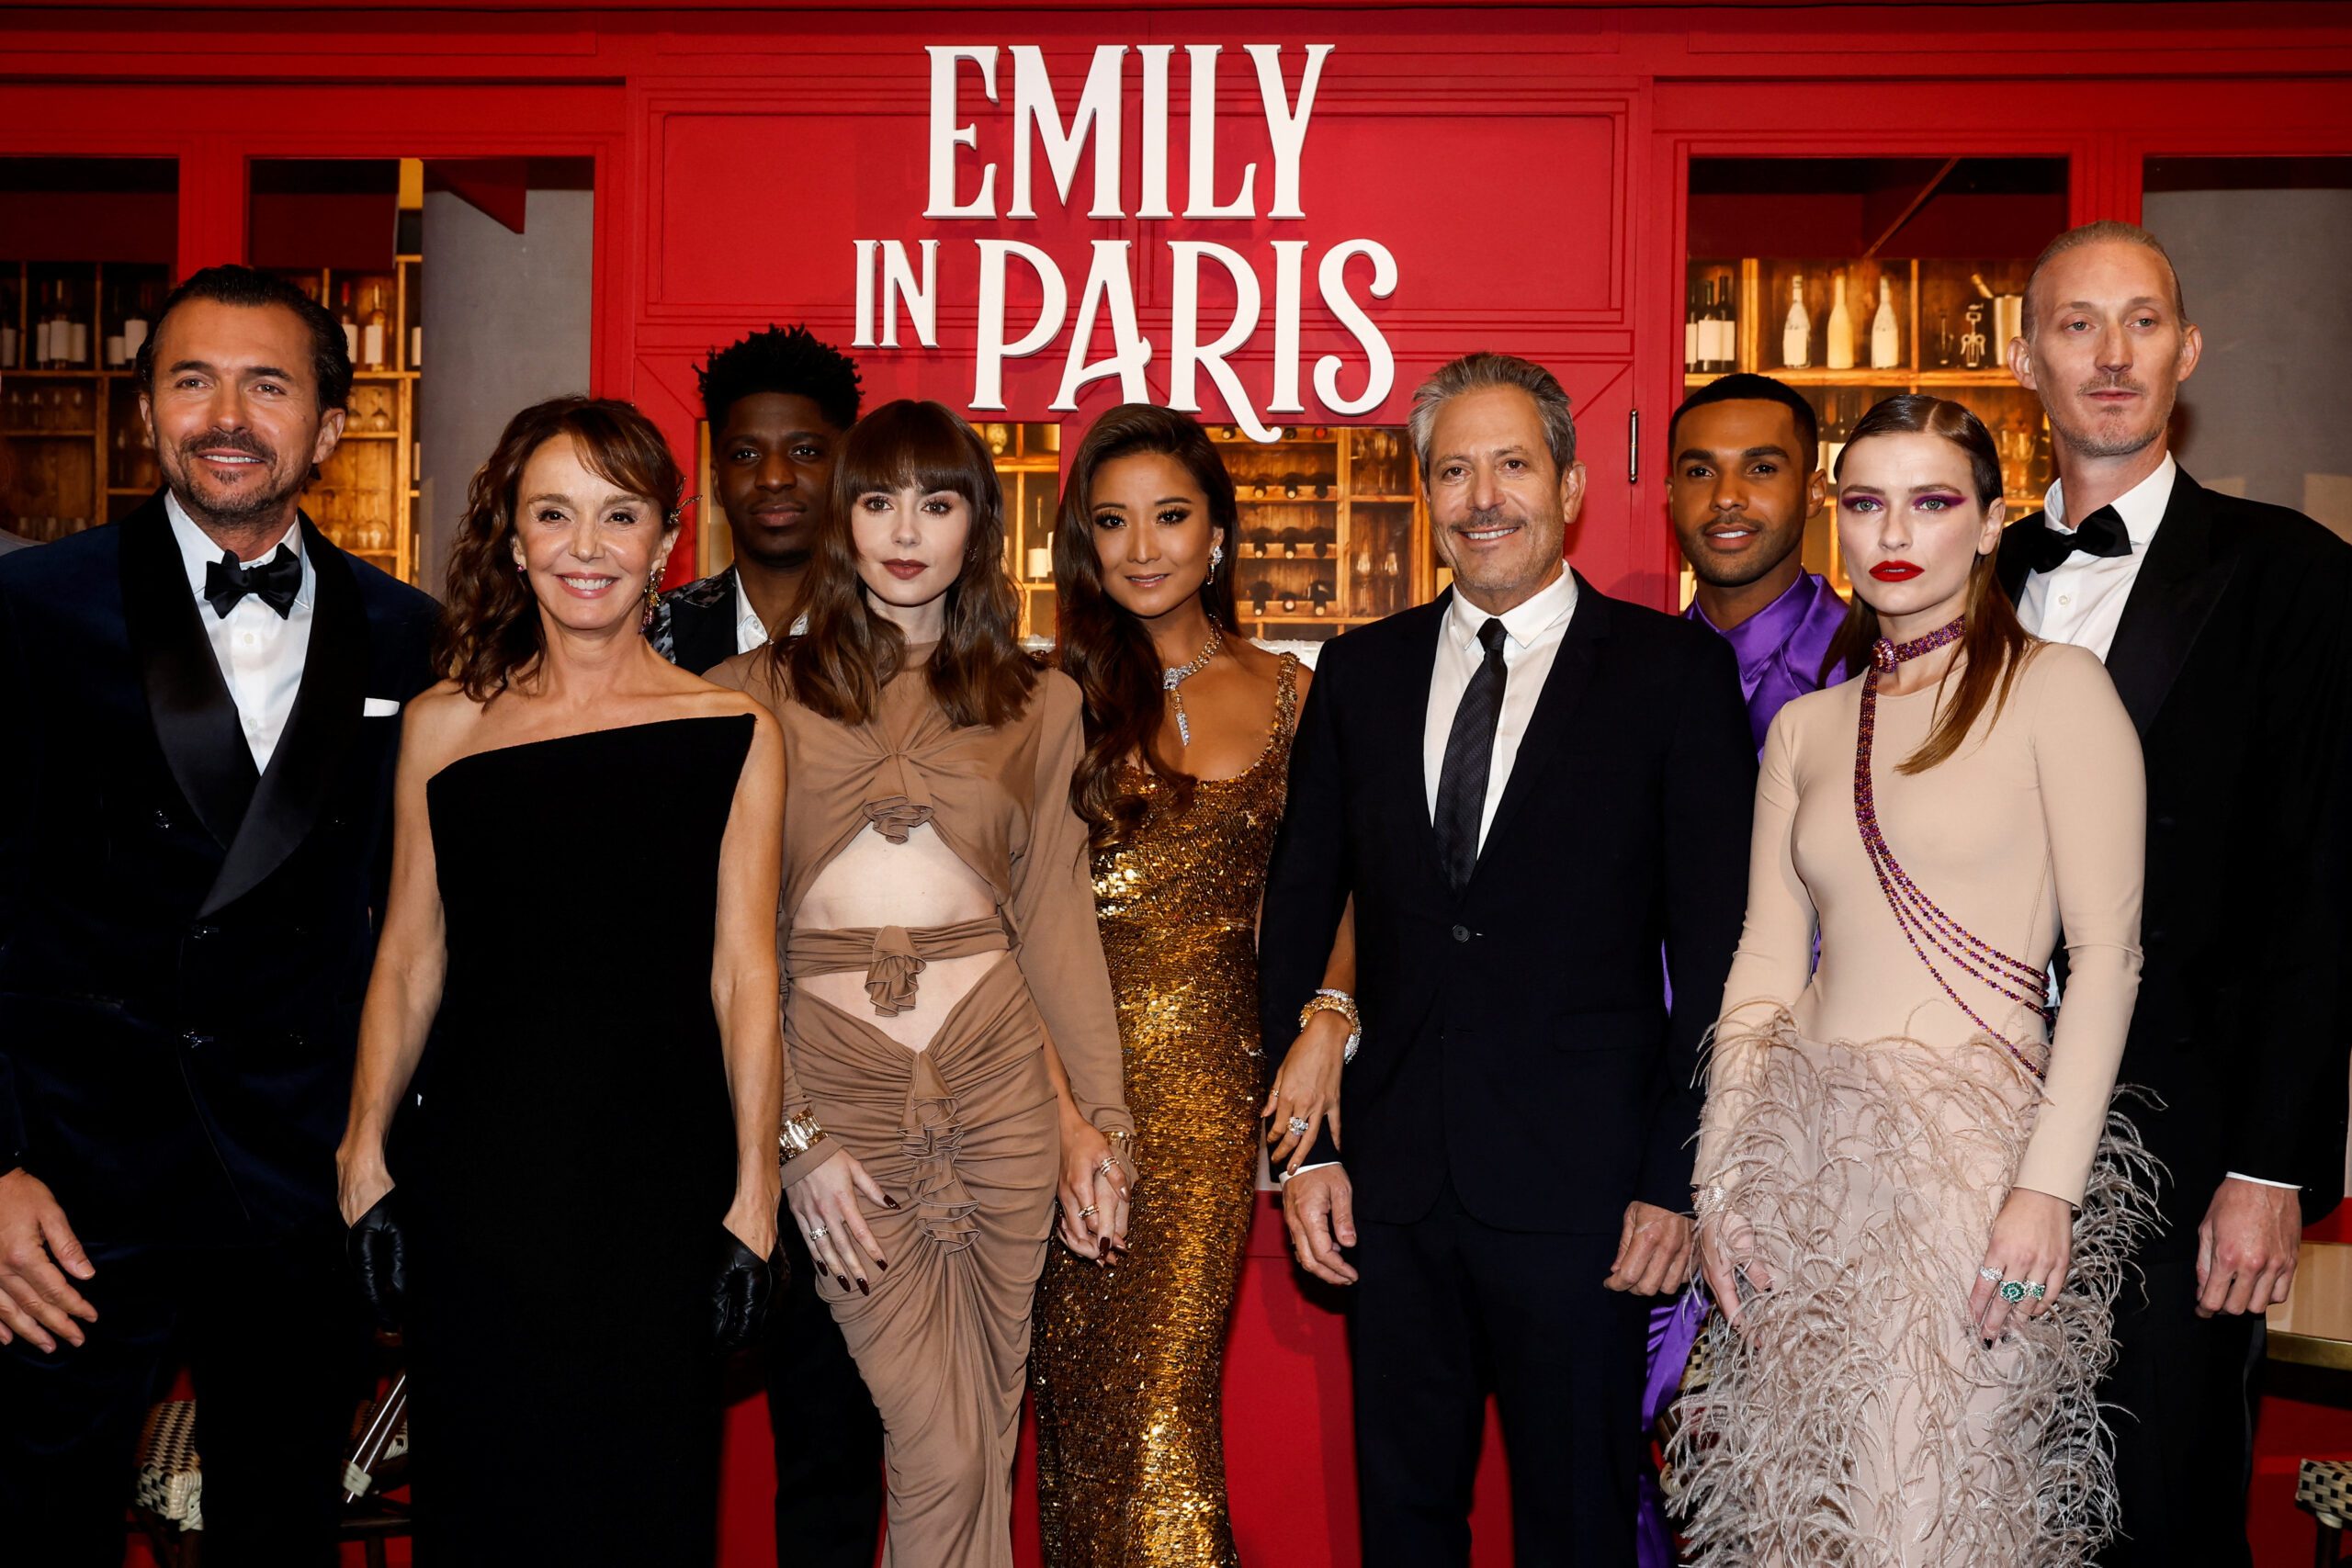 Who Is Paul Forman in 'Emily in Paris'? - 6 Facts About Nicolas's Actor